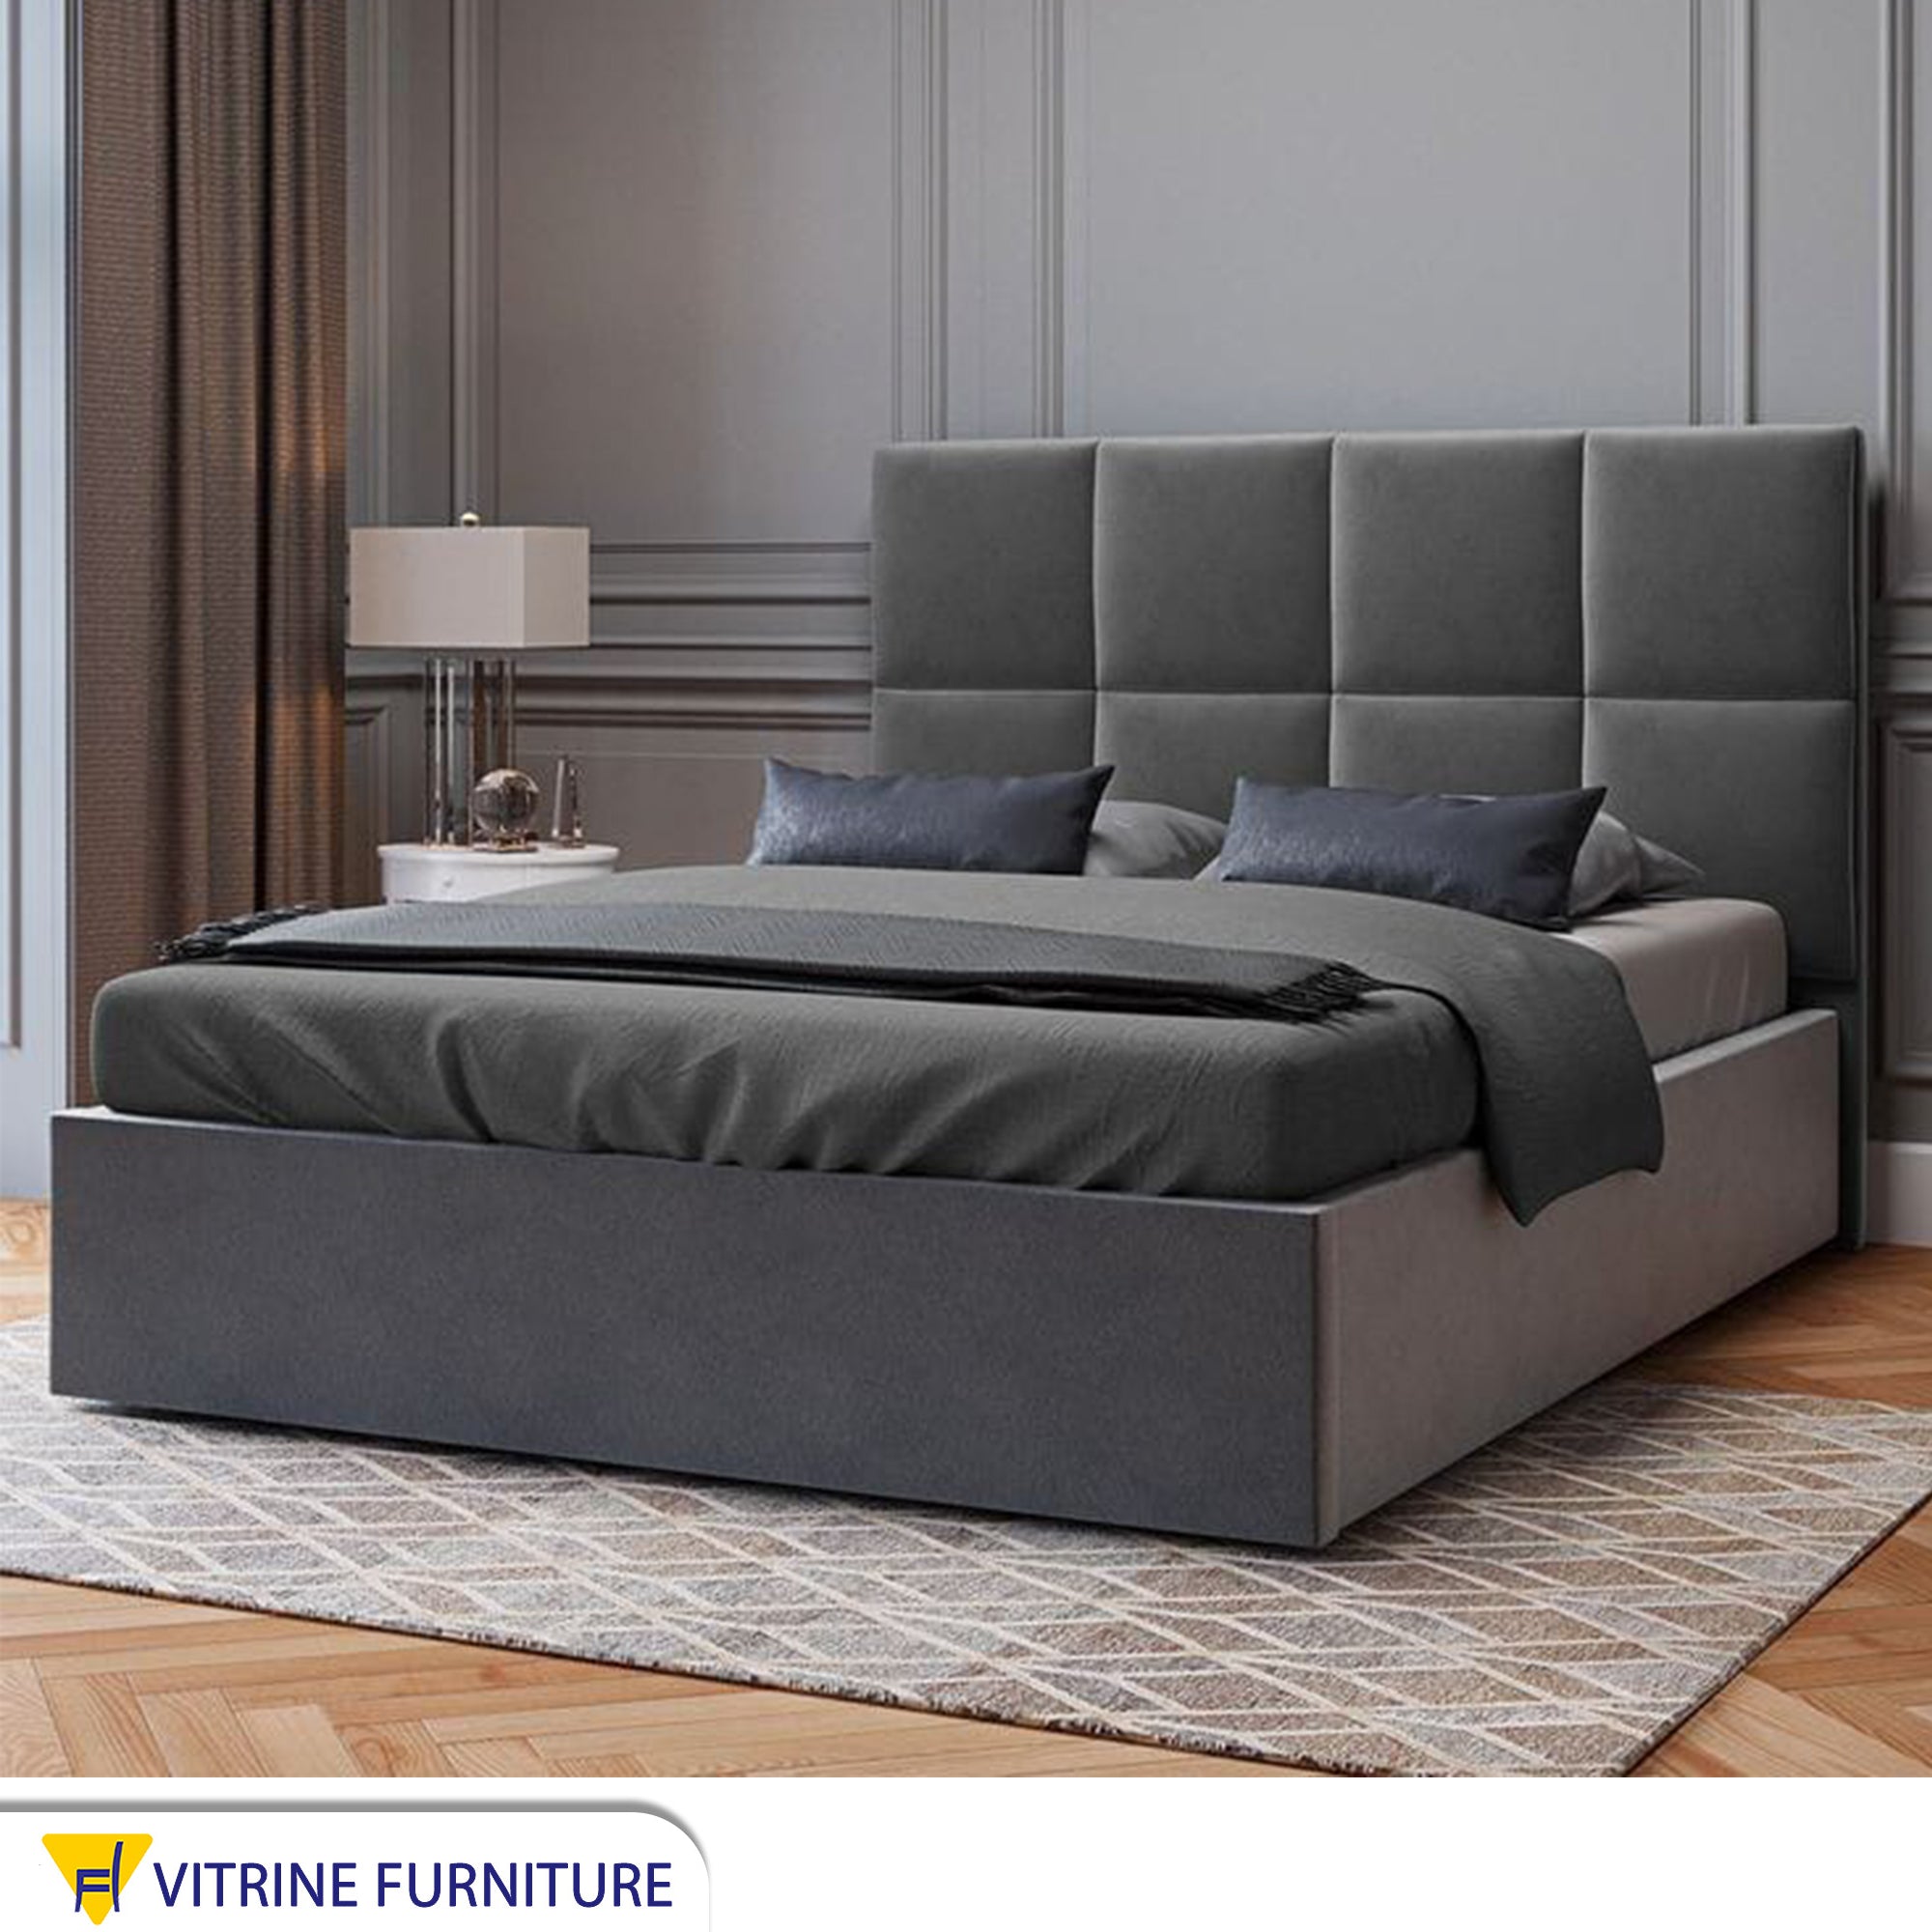 Dark gray bed with square headboard